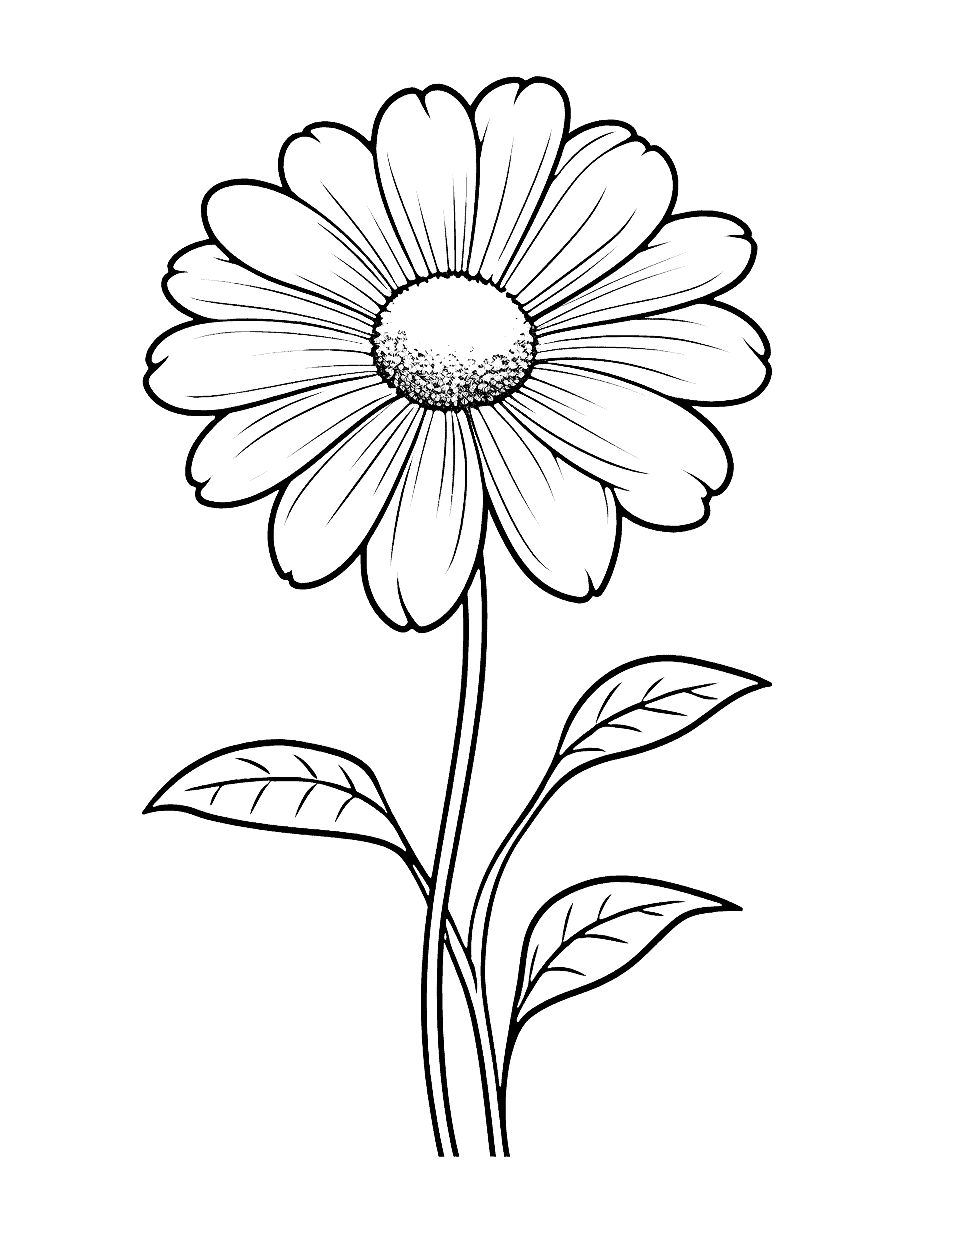 Large Daisy for Beginners Flower Coloring Page - A large, simple daisy design suitable for beginners or young children.